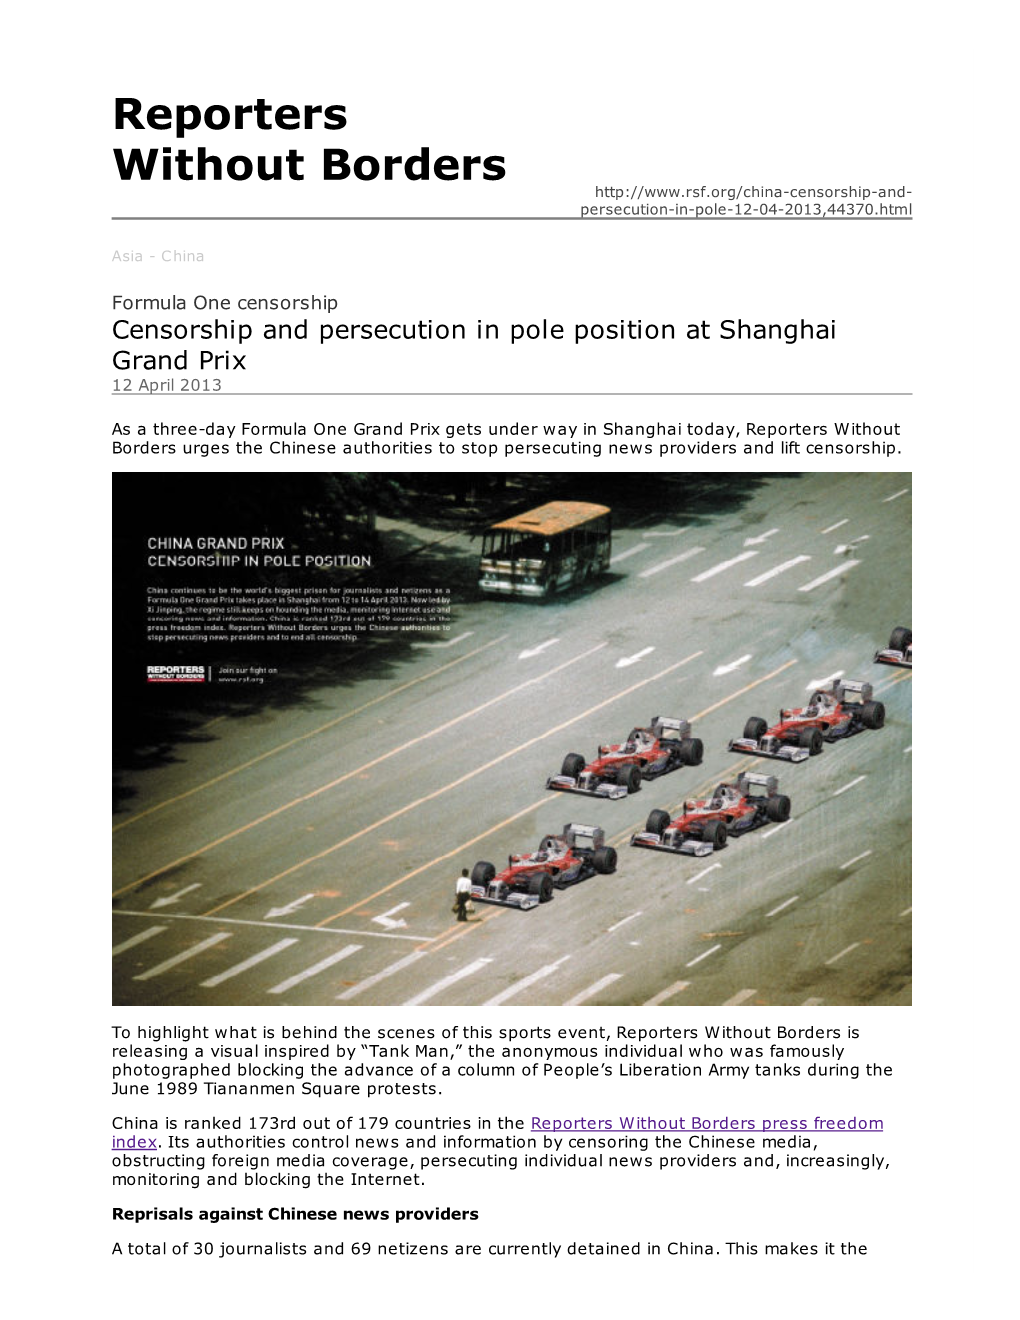 Reporters Without Borders Persecution-In-Pole-12-04-2013,44370.Html